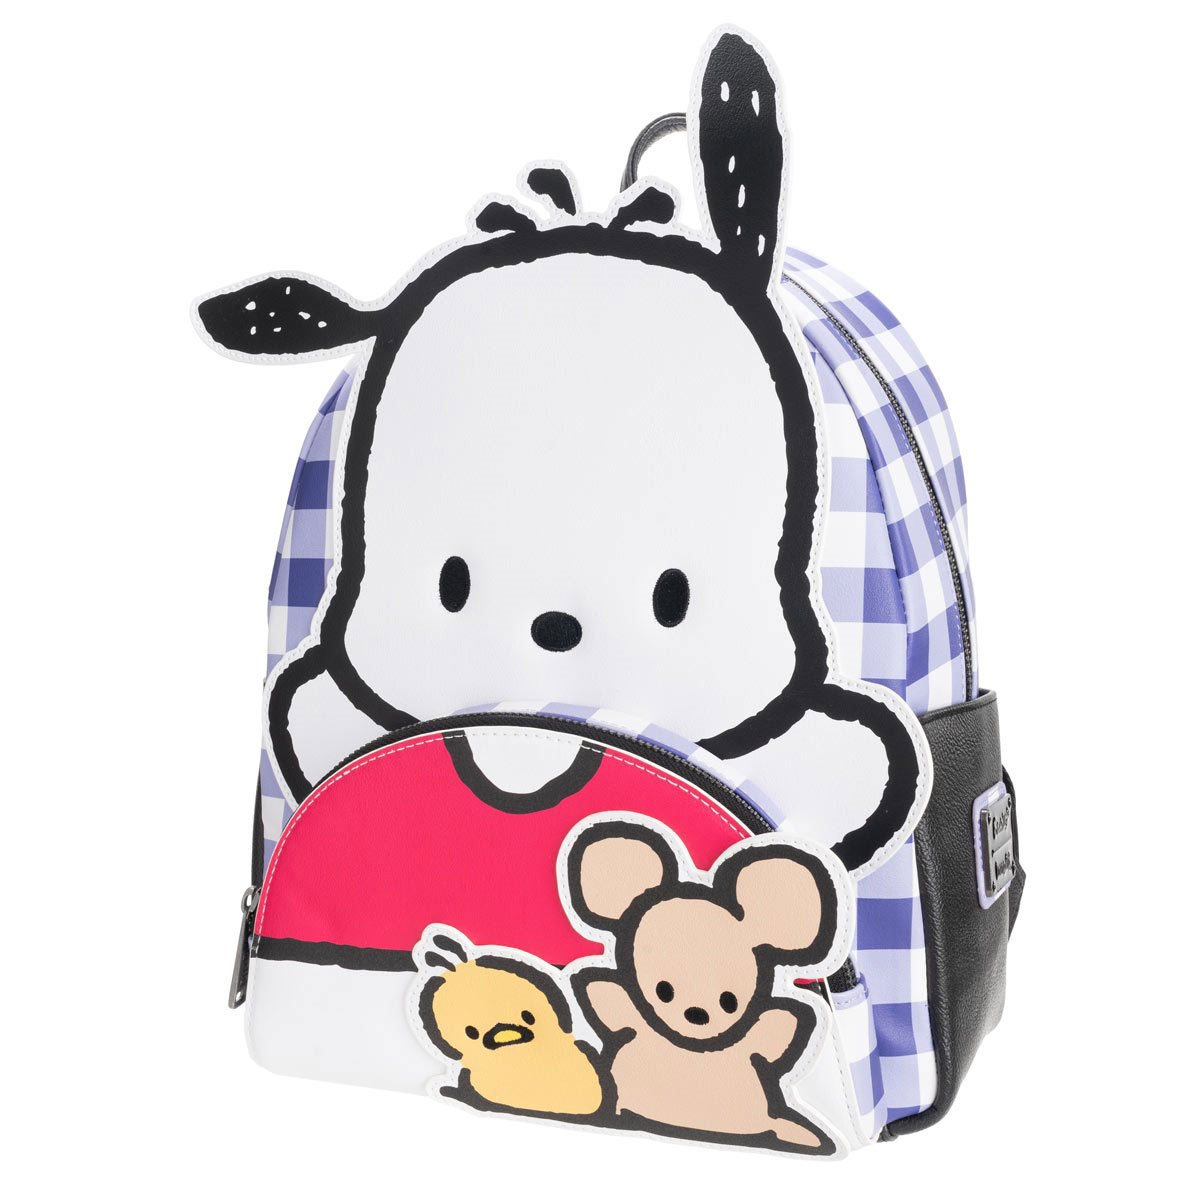 Loungefly Sanrio Pochacco Cosplay Plaid Mini Backpack - 3/4 Left view